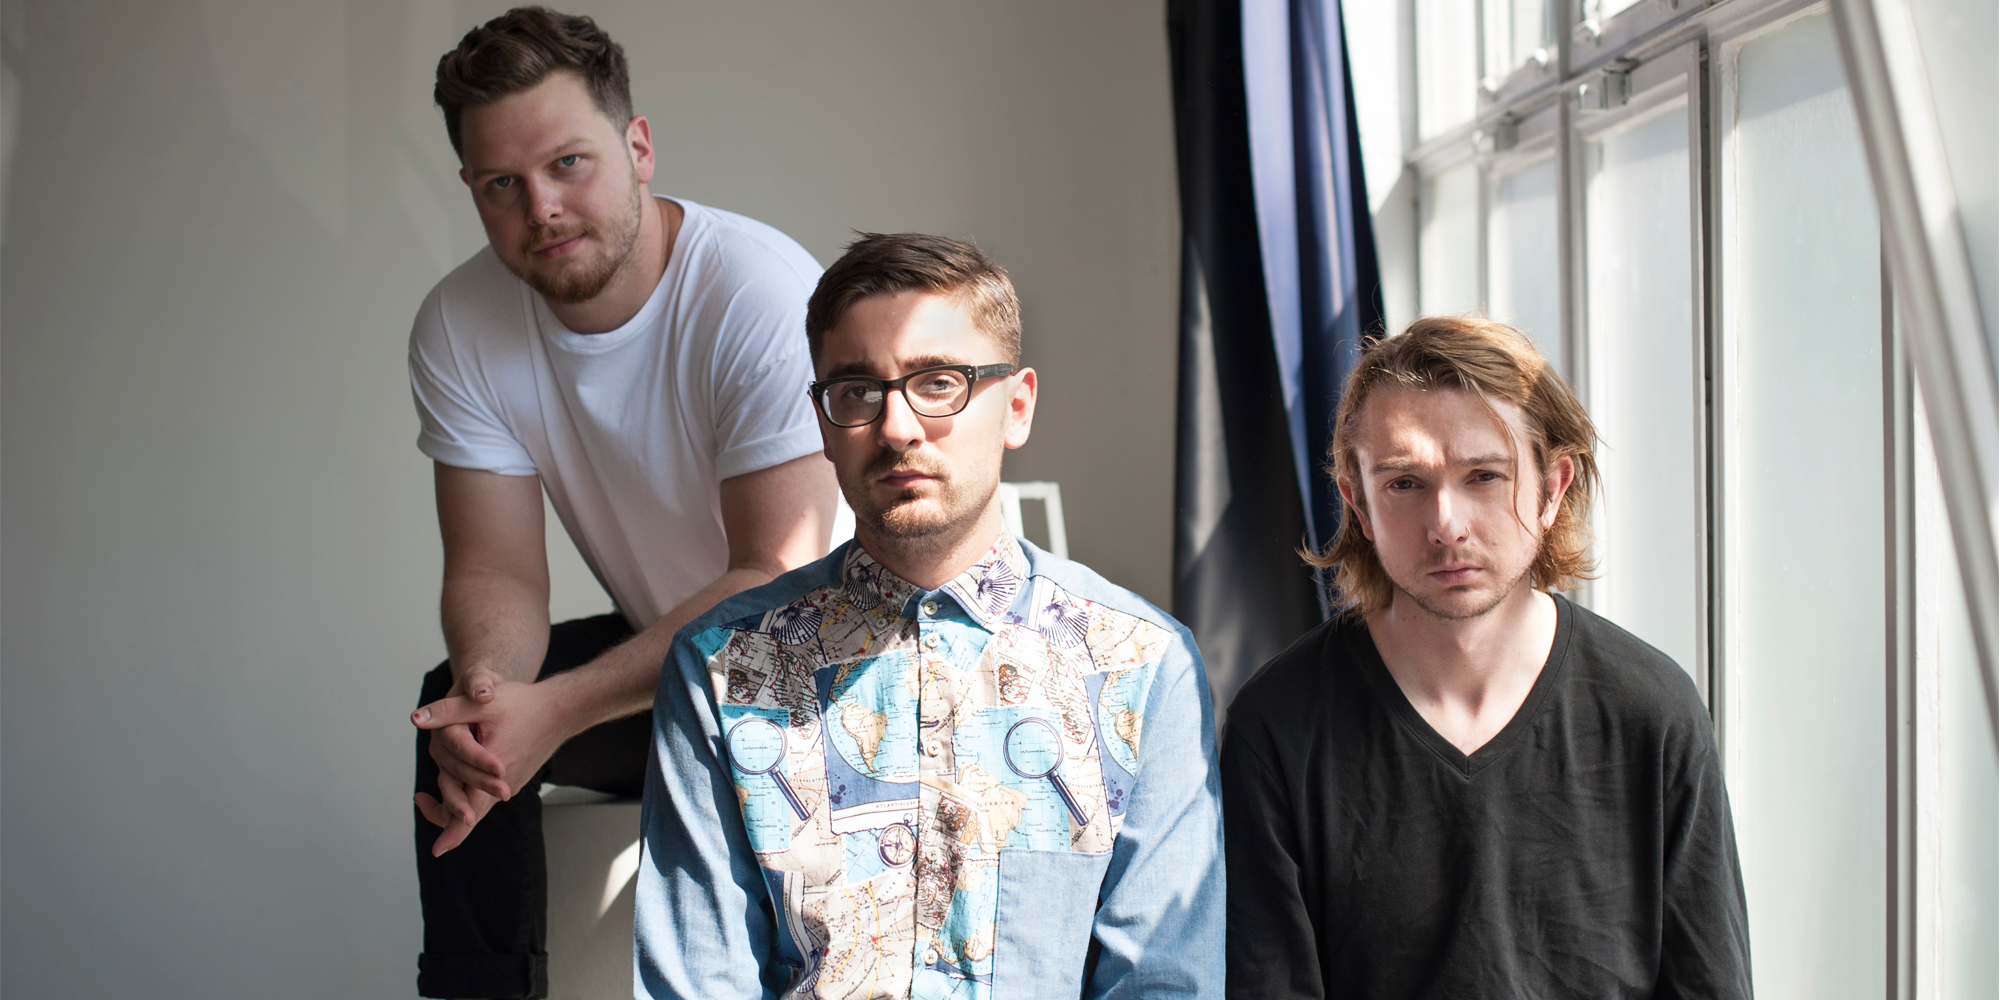 ALT-J release video for 3WW from new album ‘Relaxer’